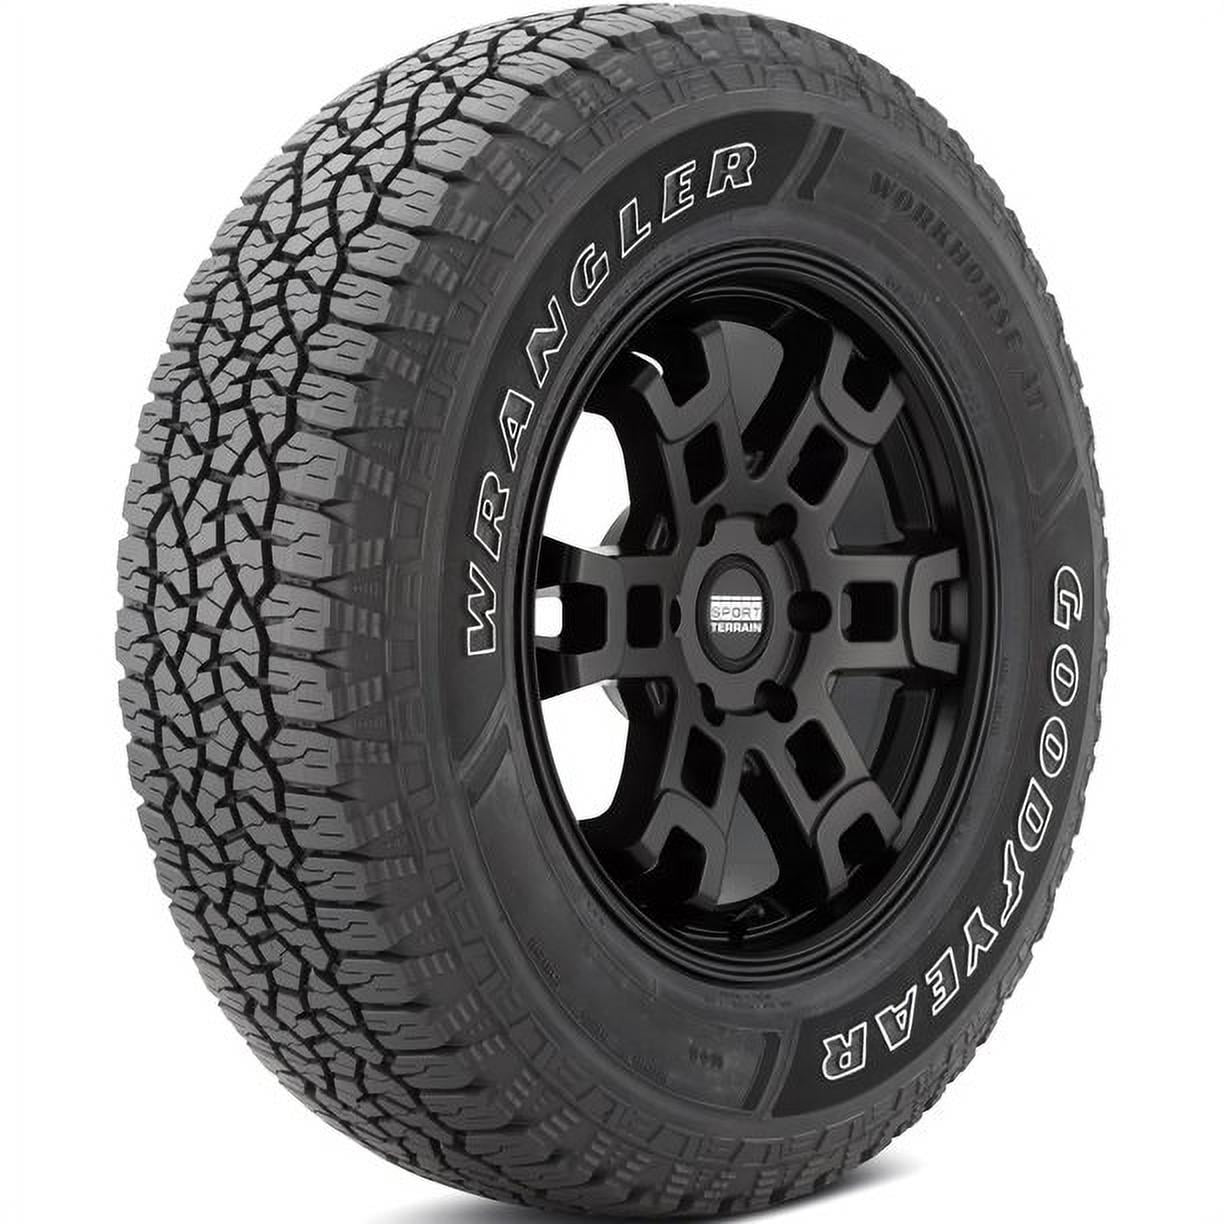 Goodyear Wrangler Workhorse AT 265/70-17 121 S Tire 